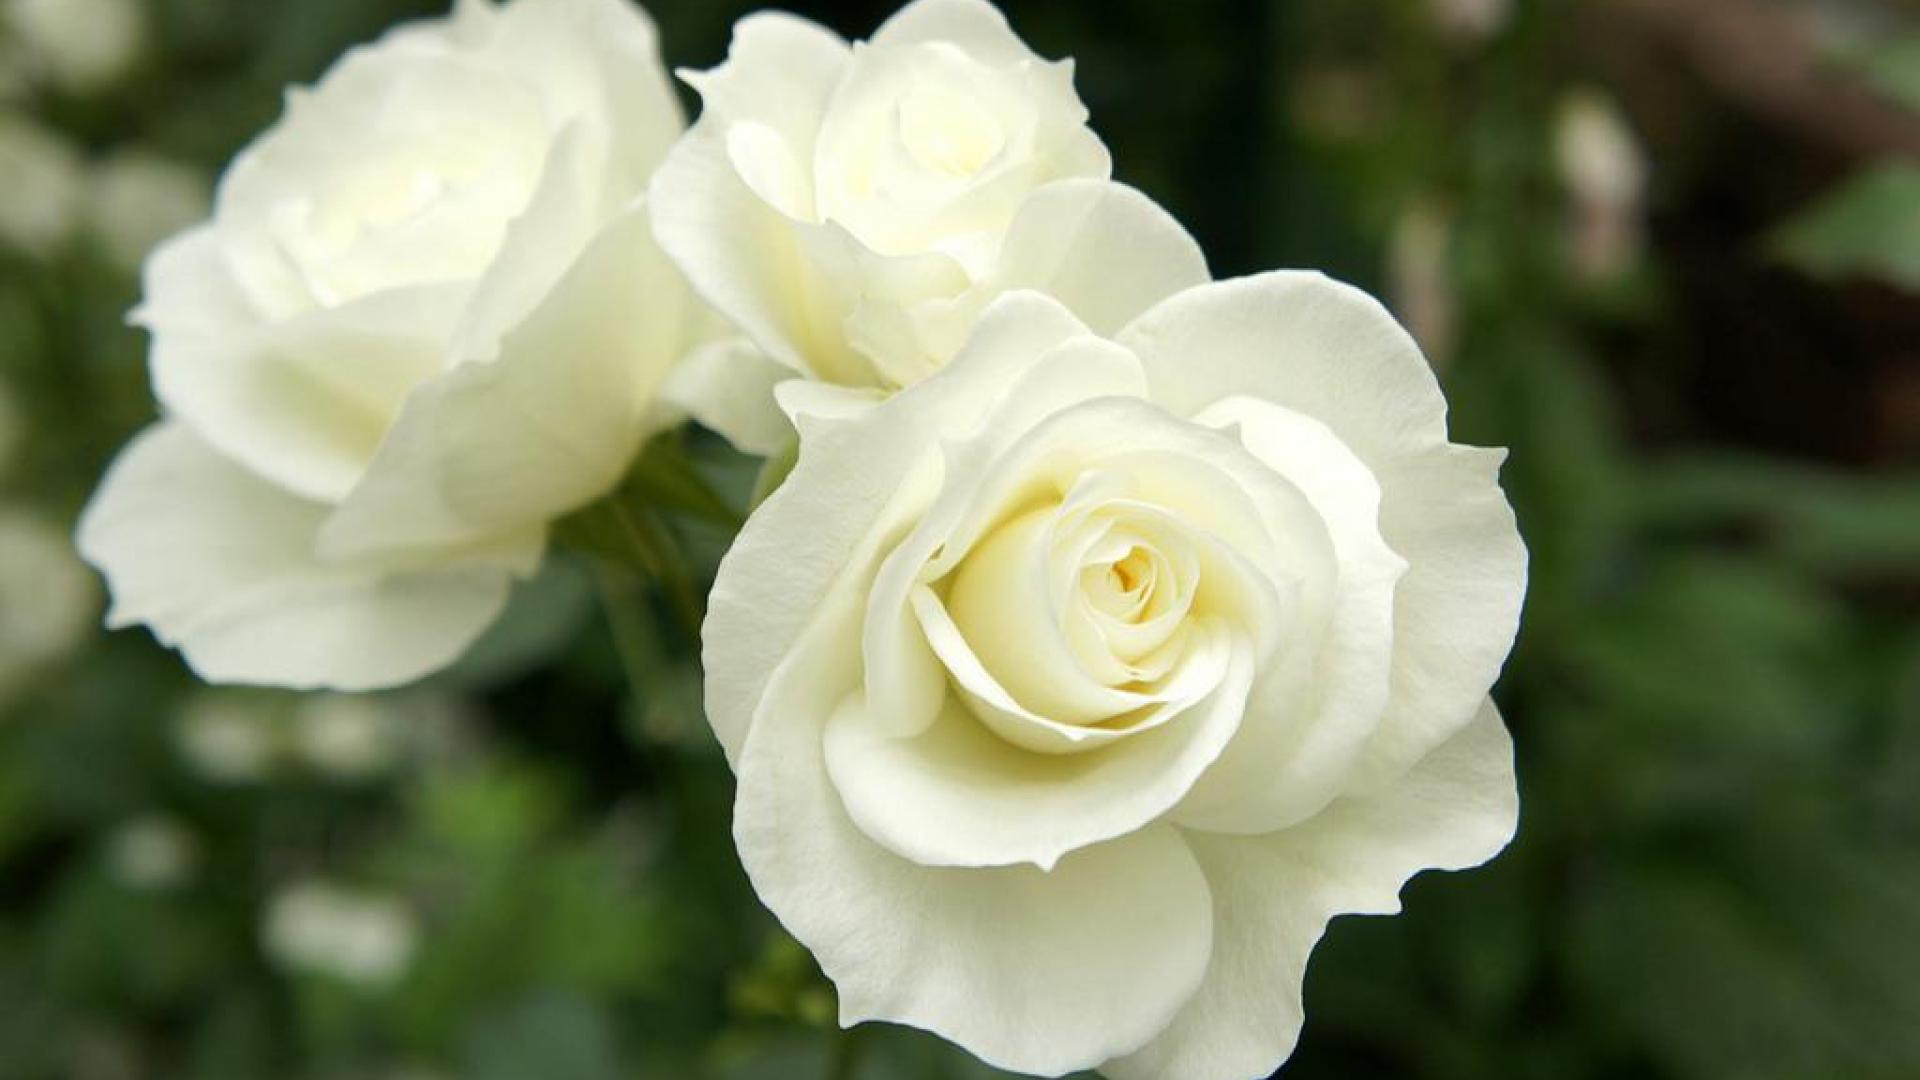 Beautiful white roses in the garden wallpapers and images   wallpapers 1920x1080